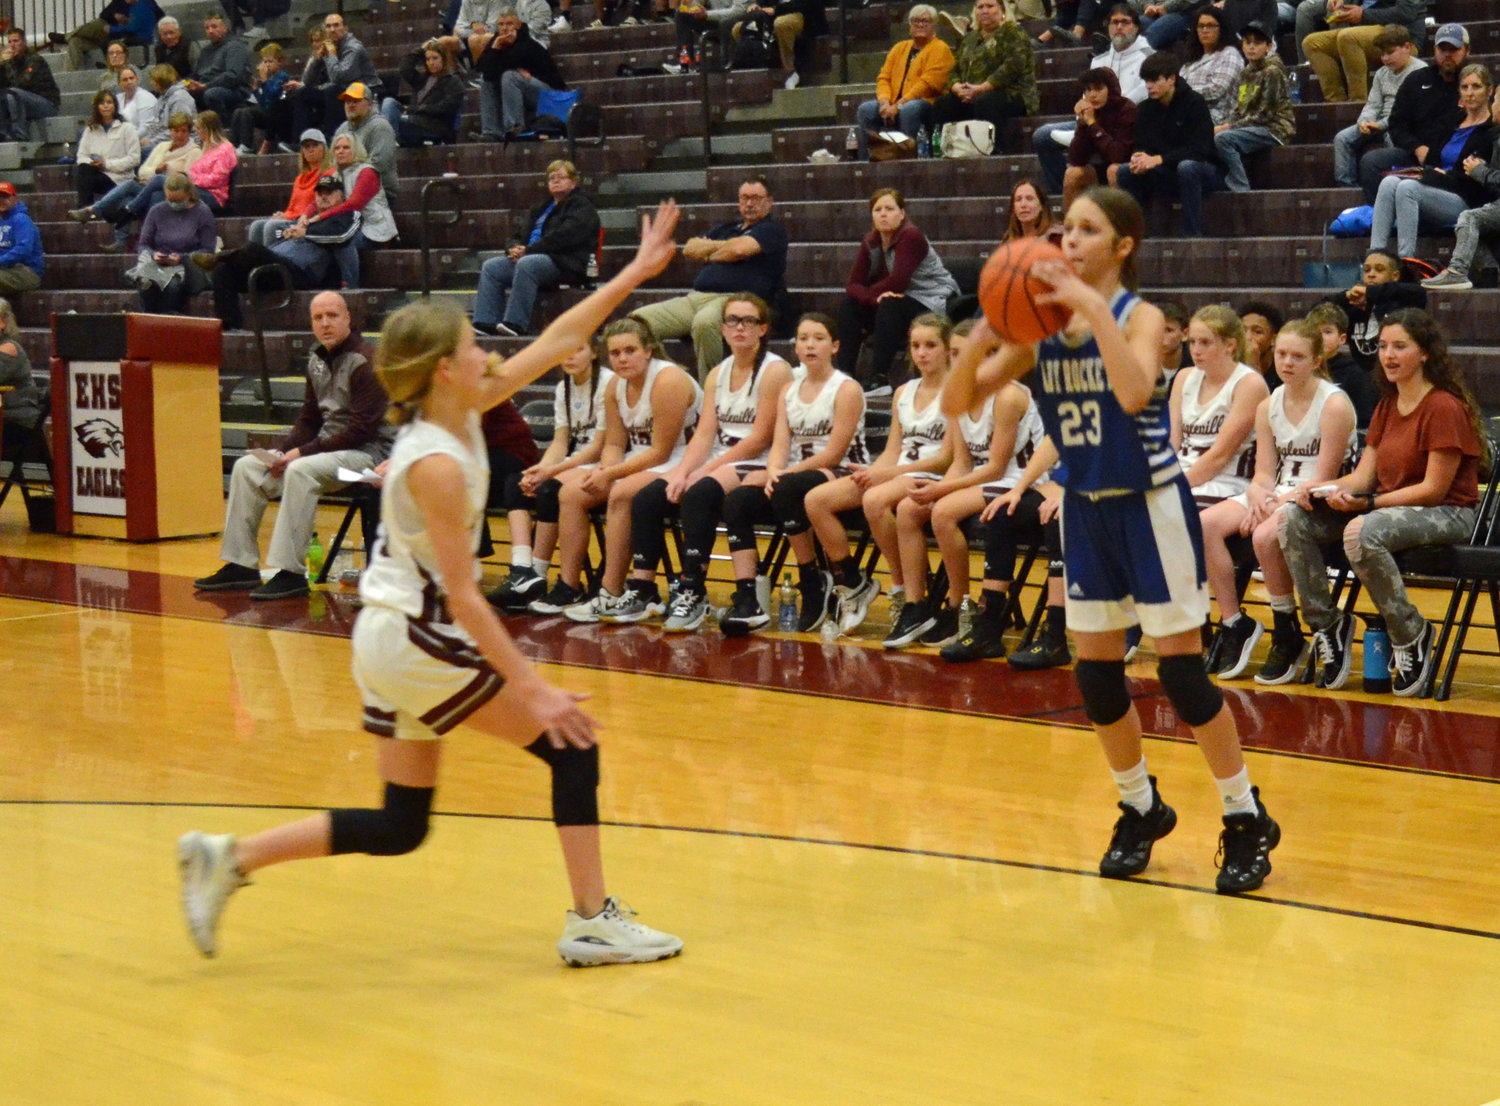 Forrest’s Sadie Smith (23) led all scorers in the contest with 11 points.